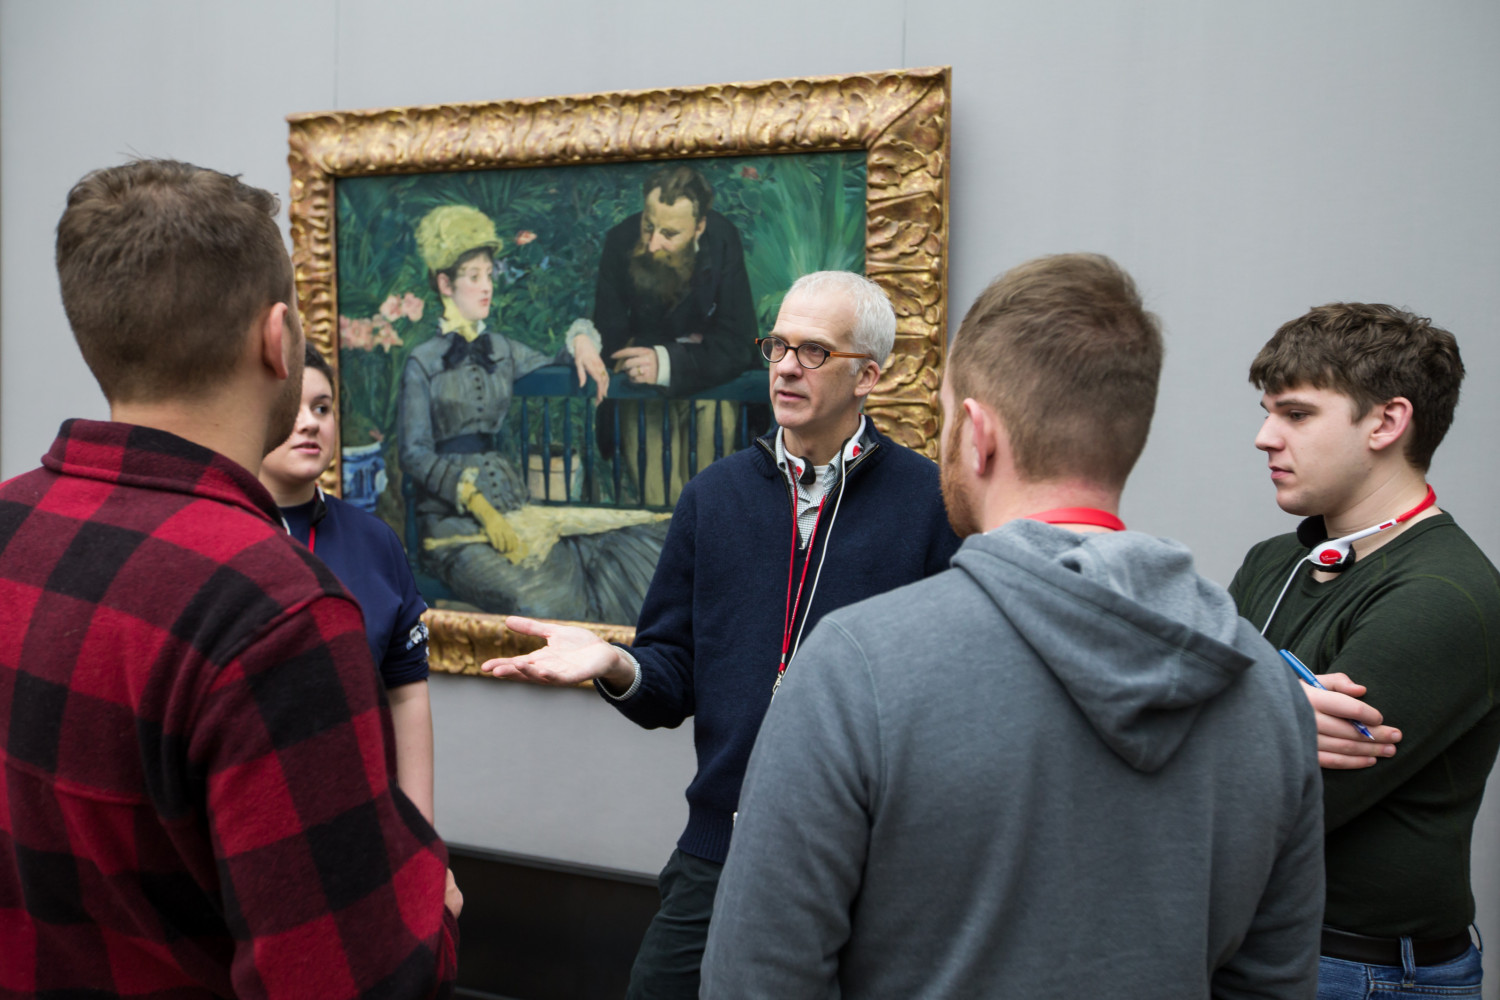 Prof. Temple Burling and students view art in a museum in Germany.